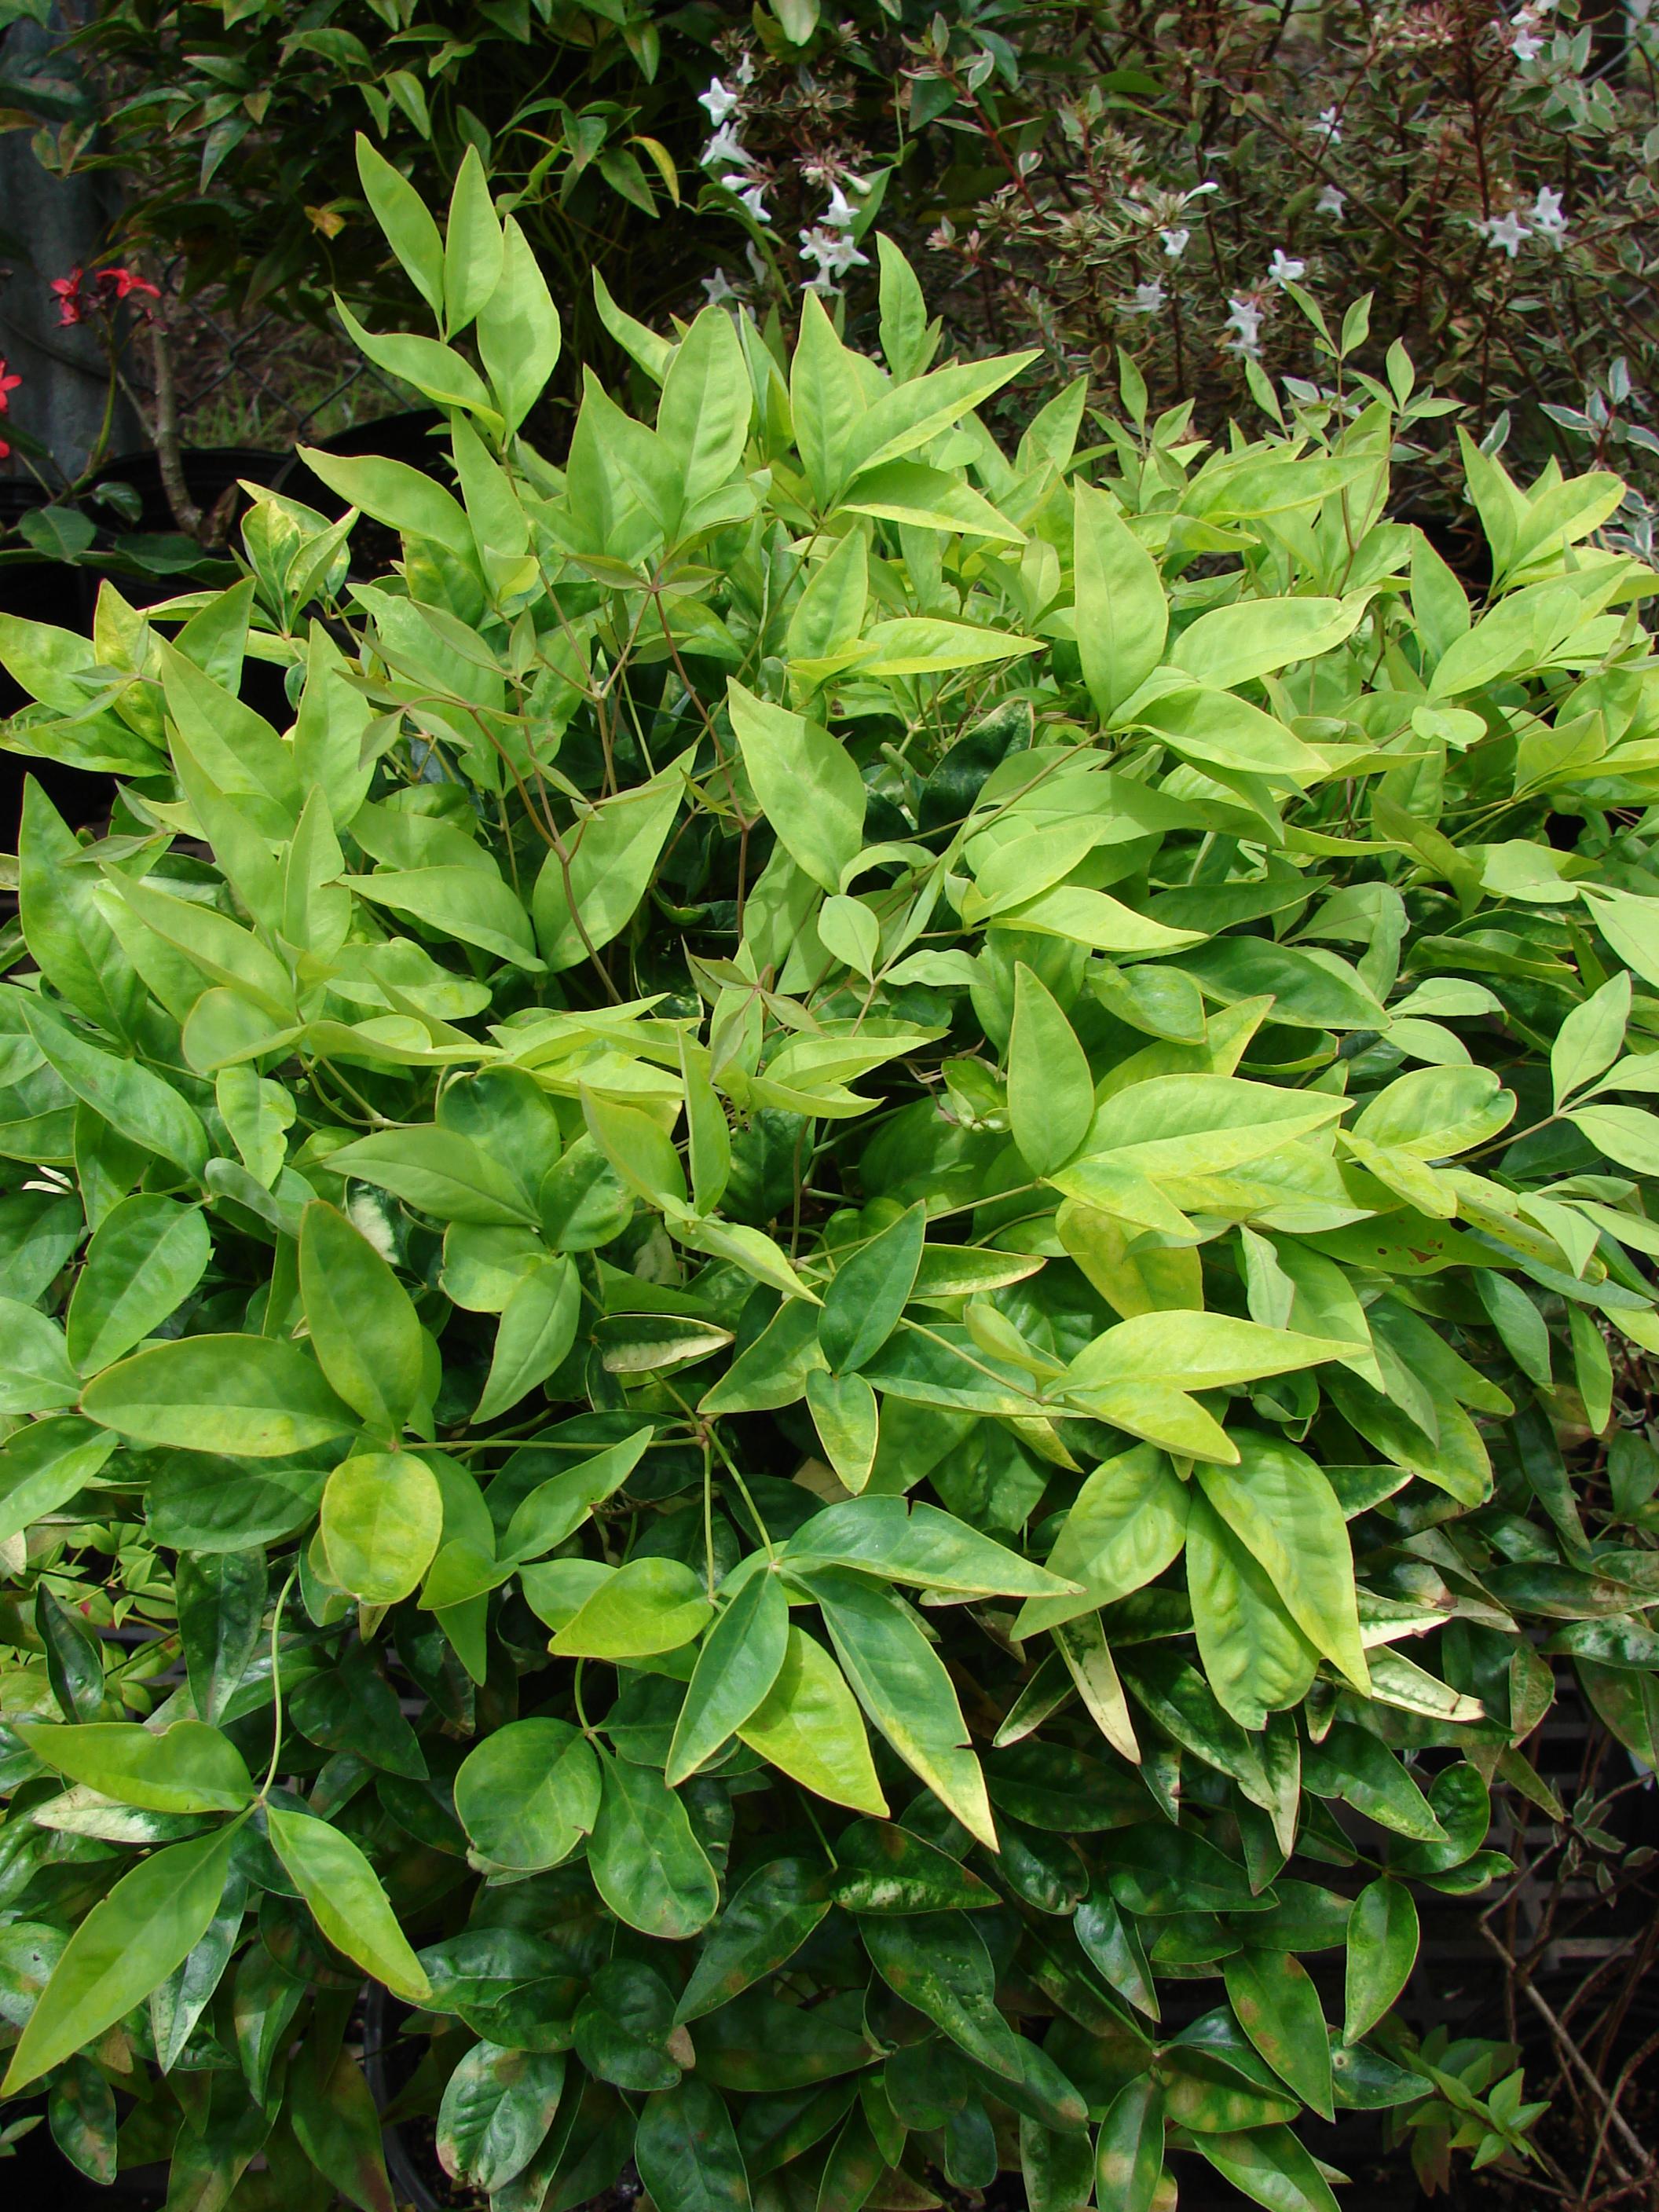 yellow-green leaves on light-green stems